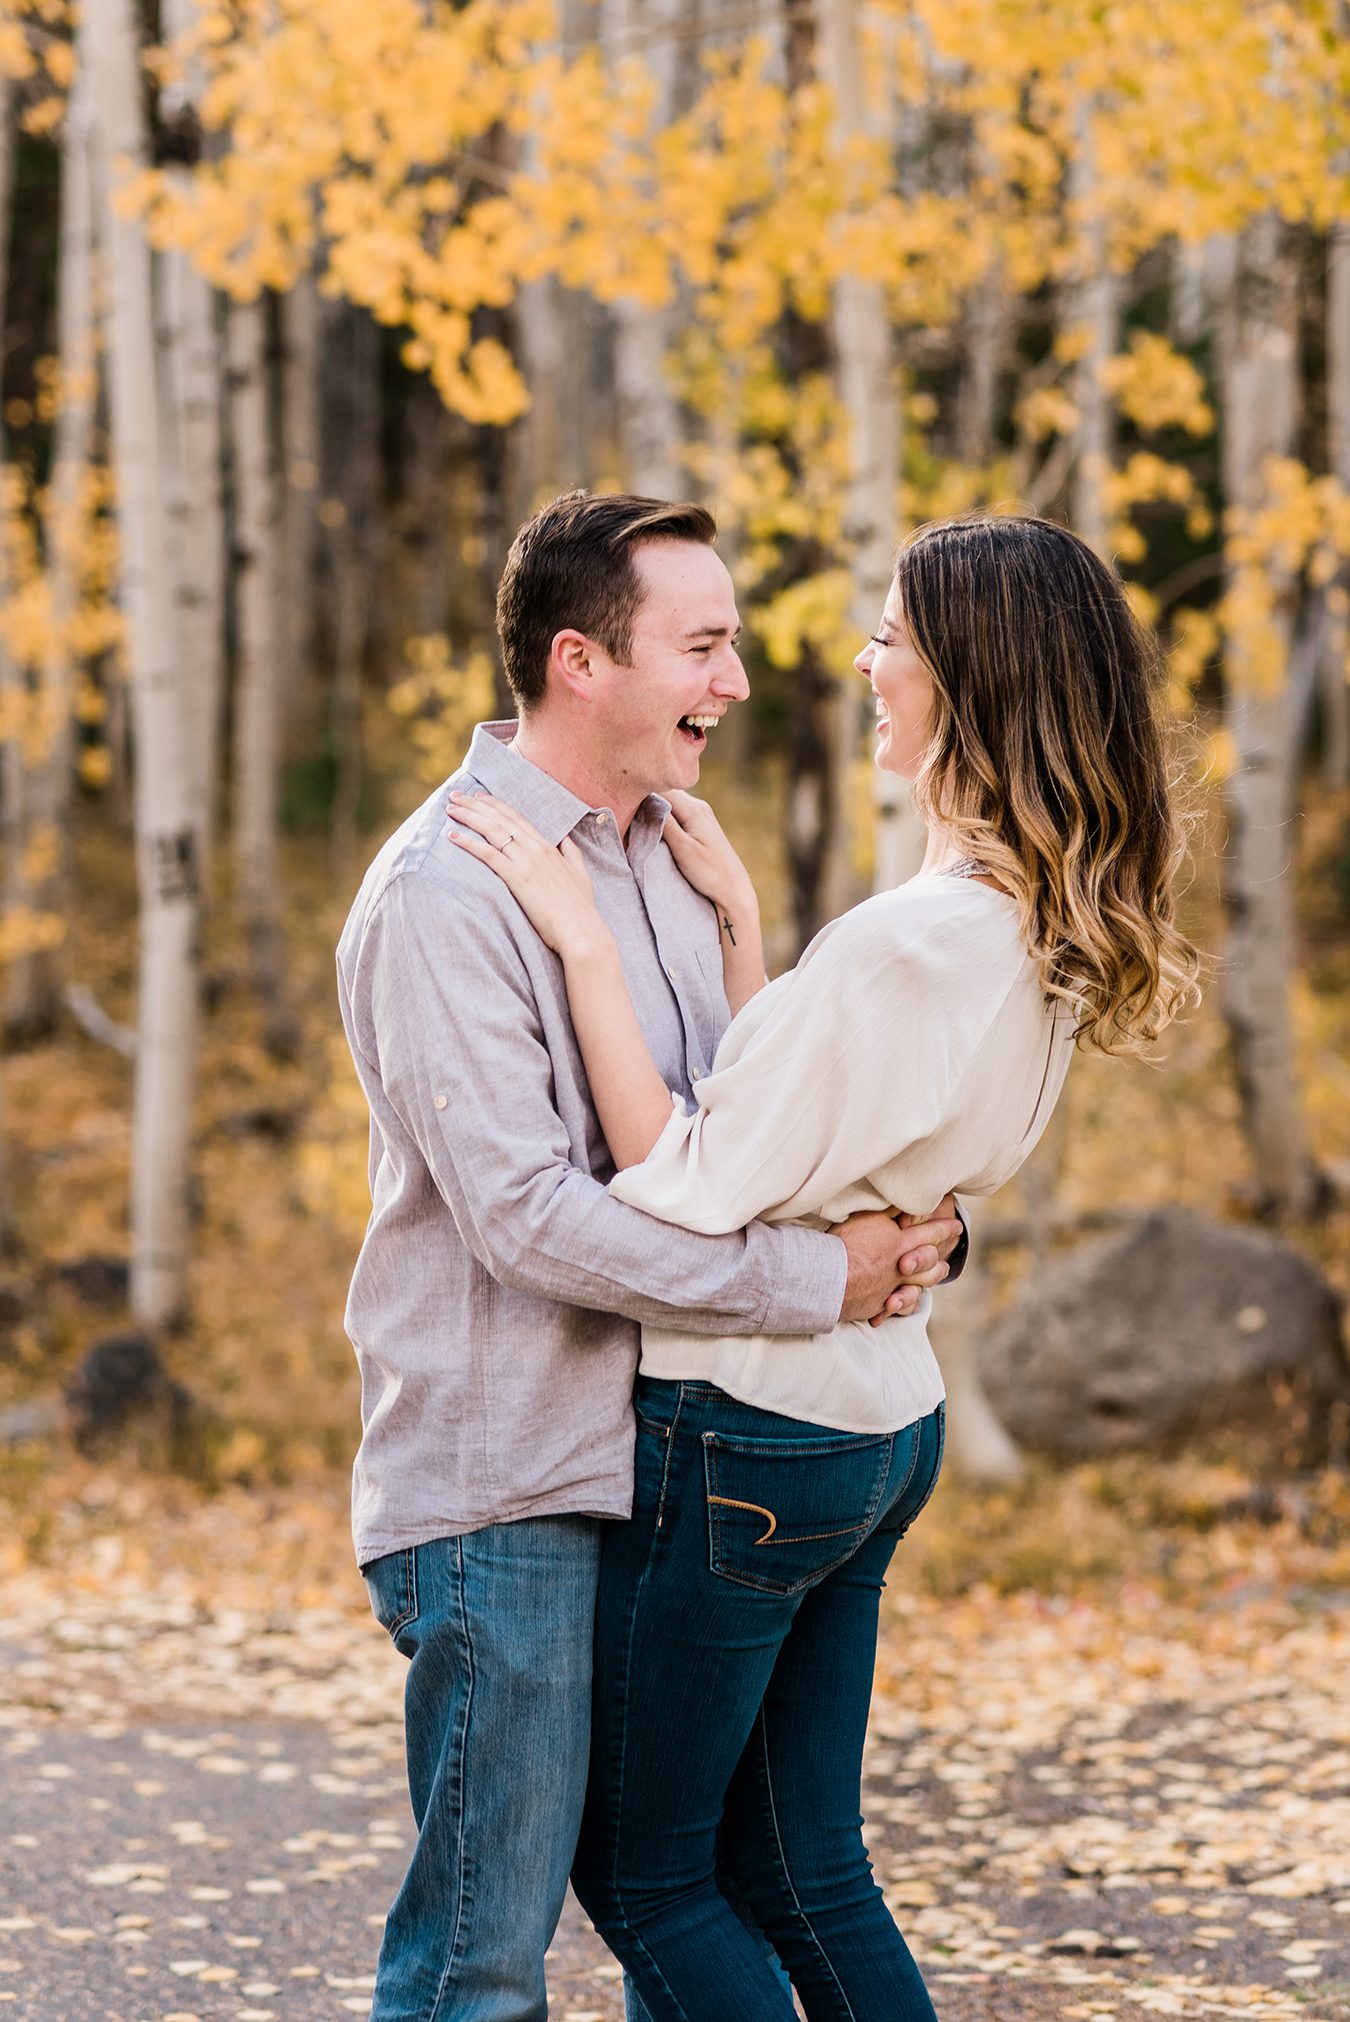 Molly and Connor's Color Sunday engagement session on the Mesa | amanda.matilda.photographyMolly and Connor's Color Sunday engagement session on the Mesa | amanda.matilda.photography